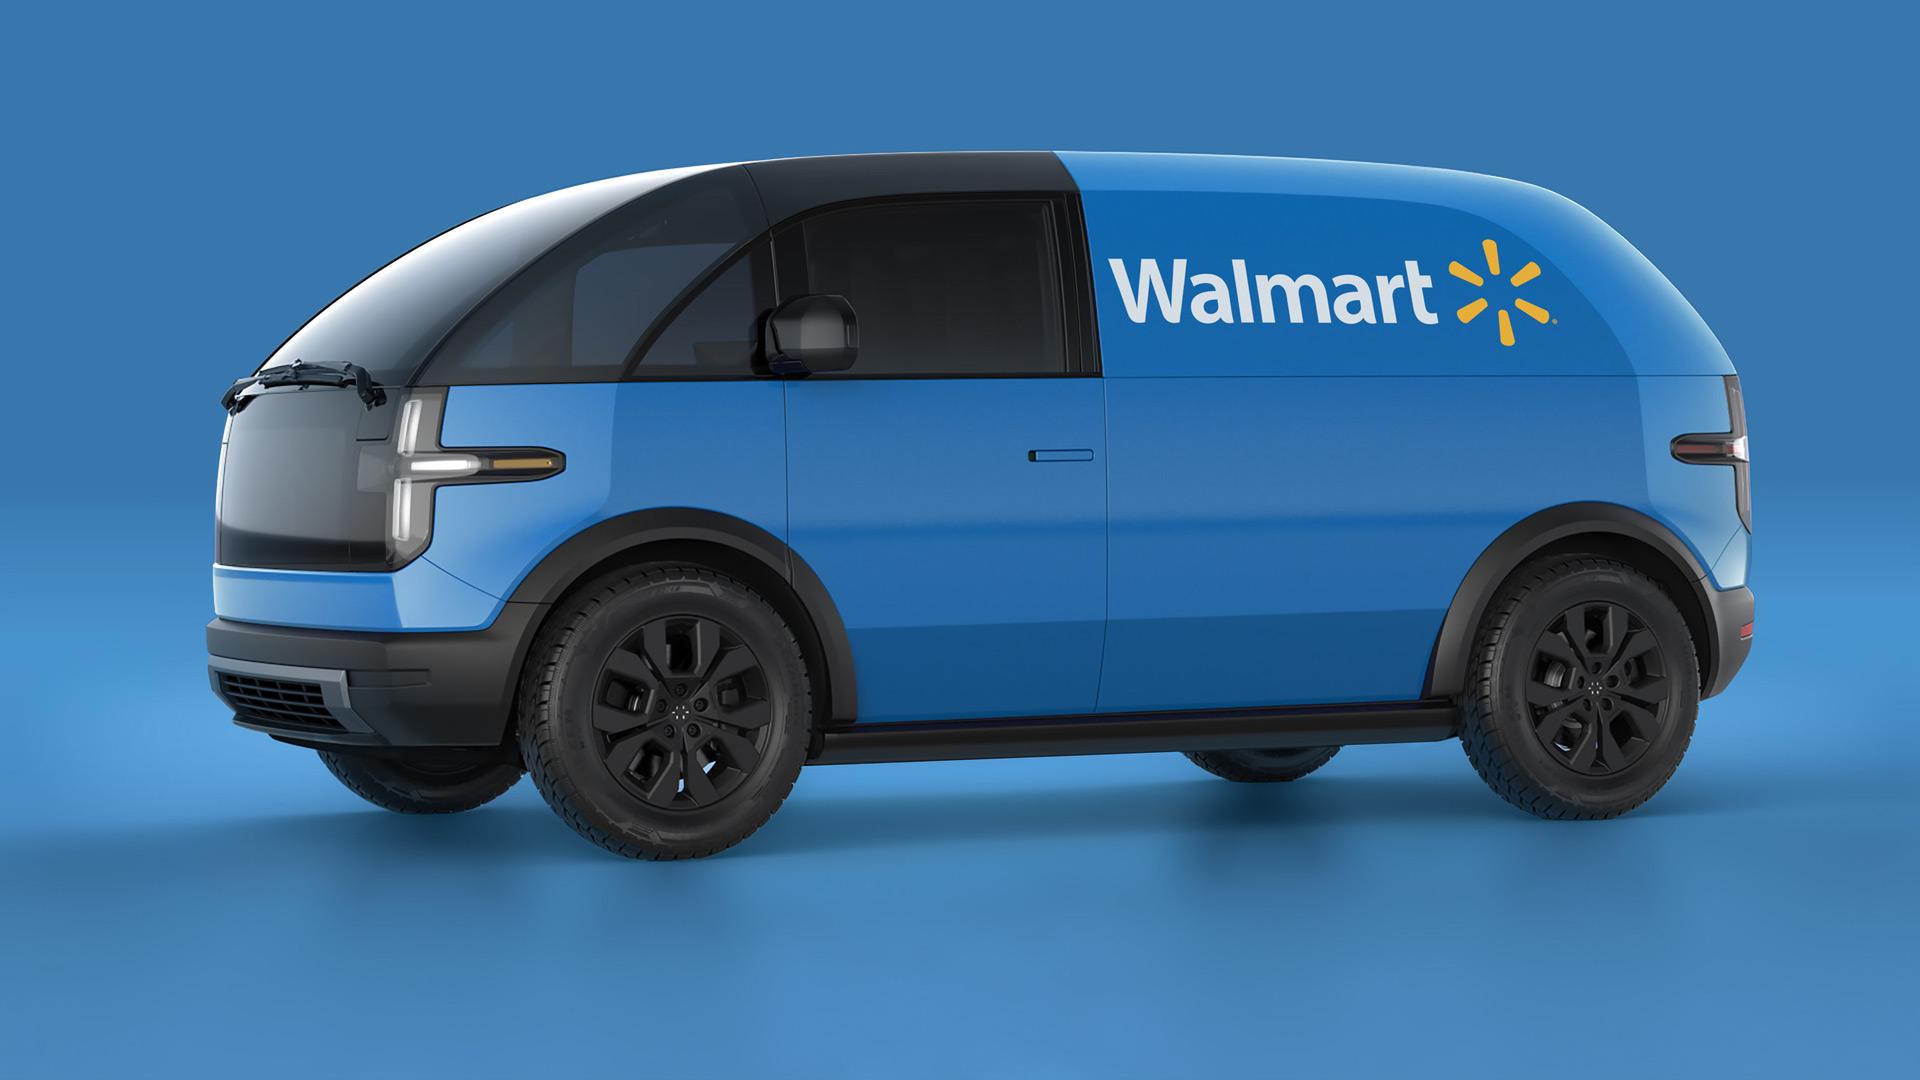 canoo-lifestyle-delivery-vehicle-with-walmart-logo_100847486_h